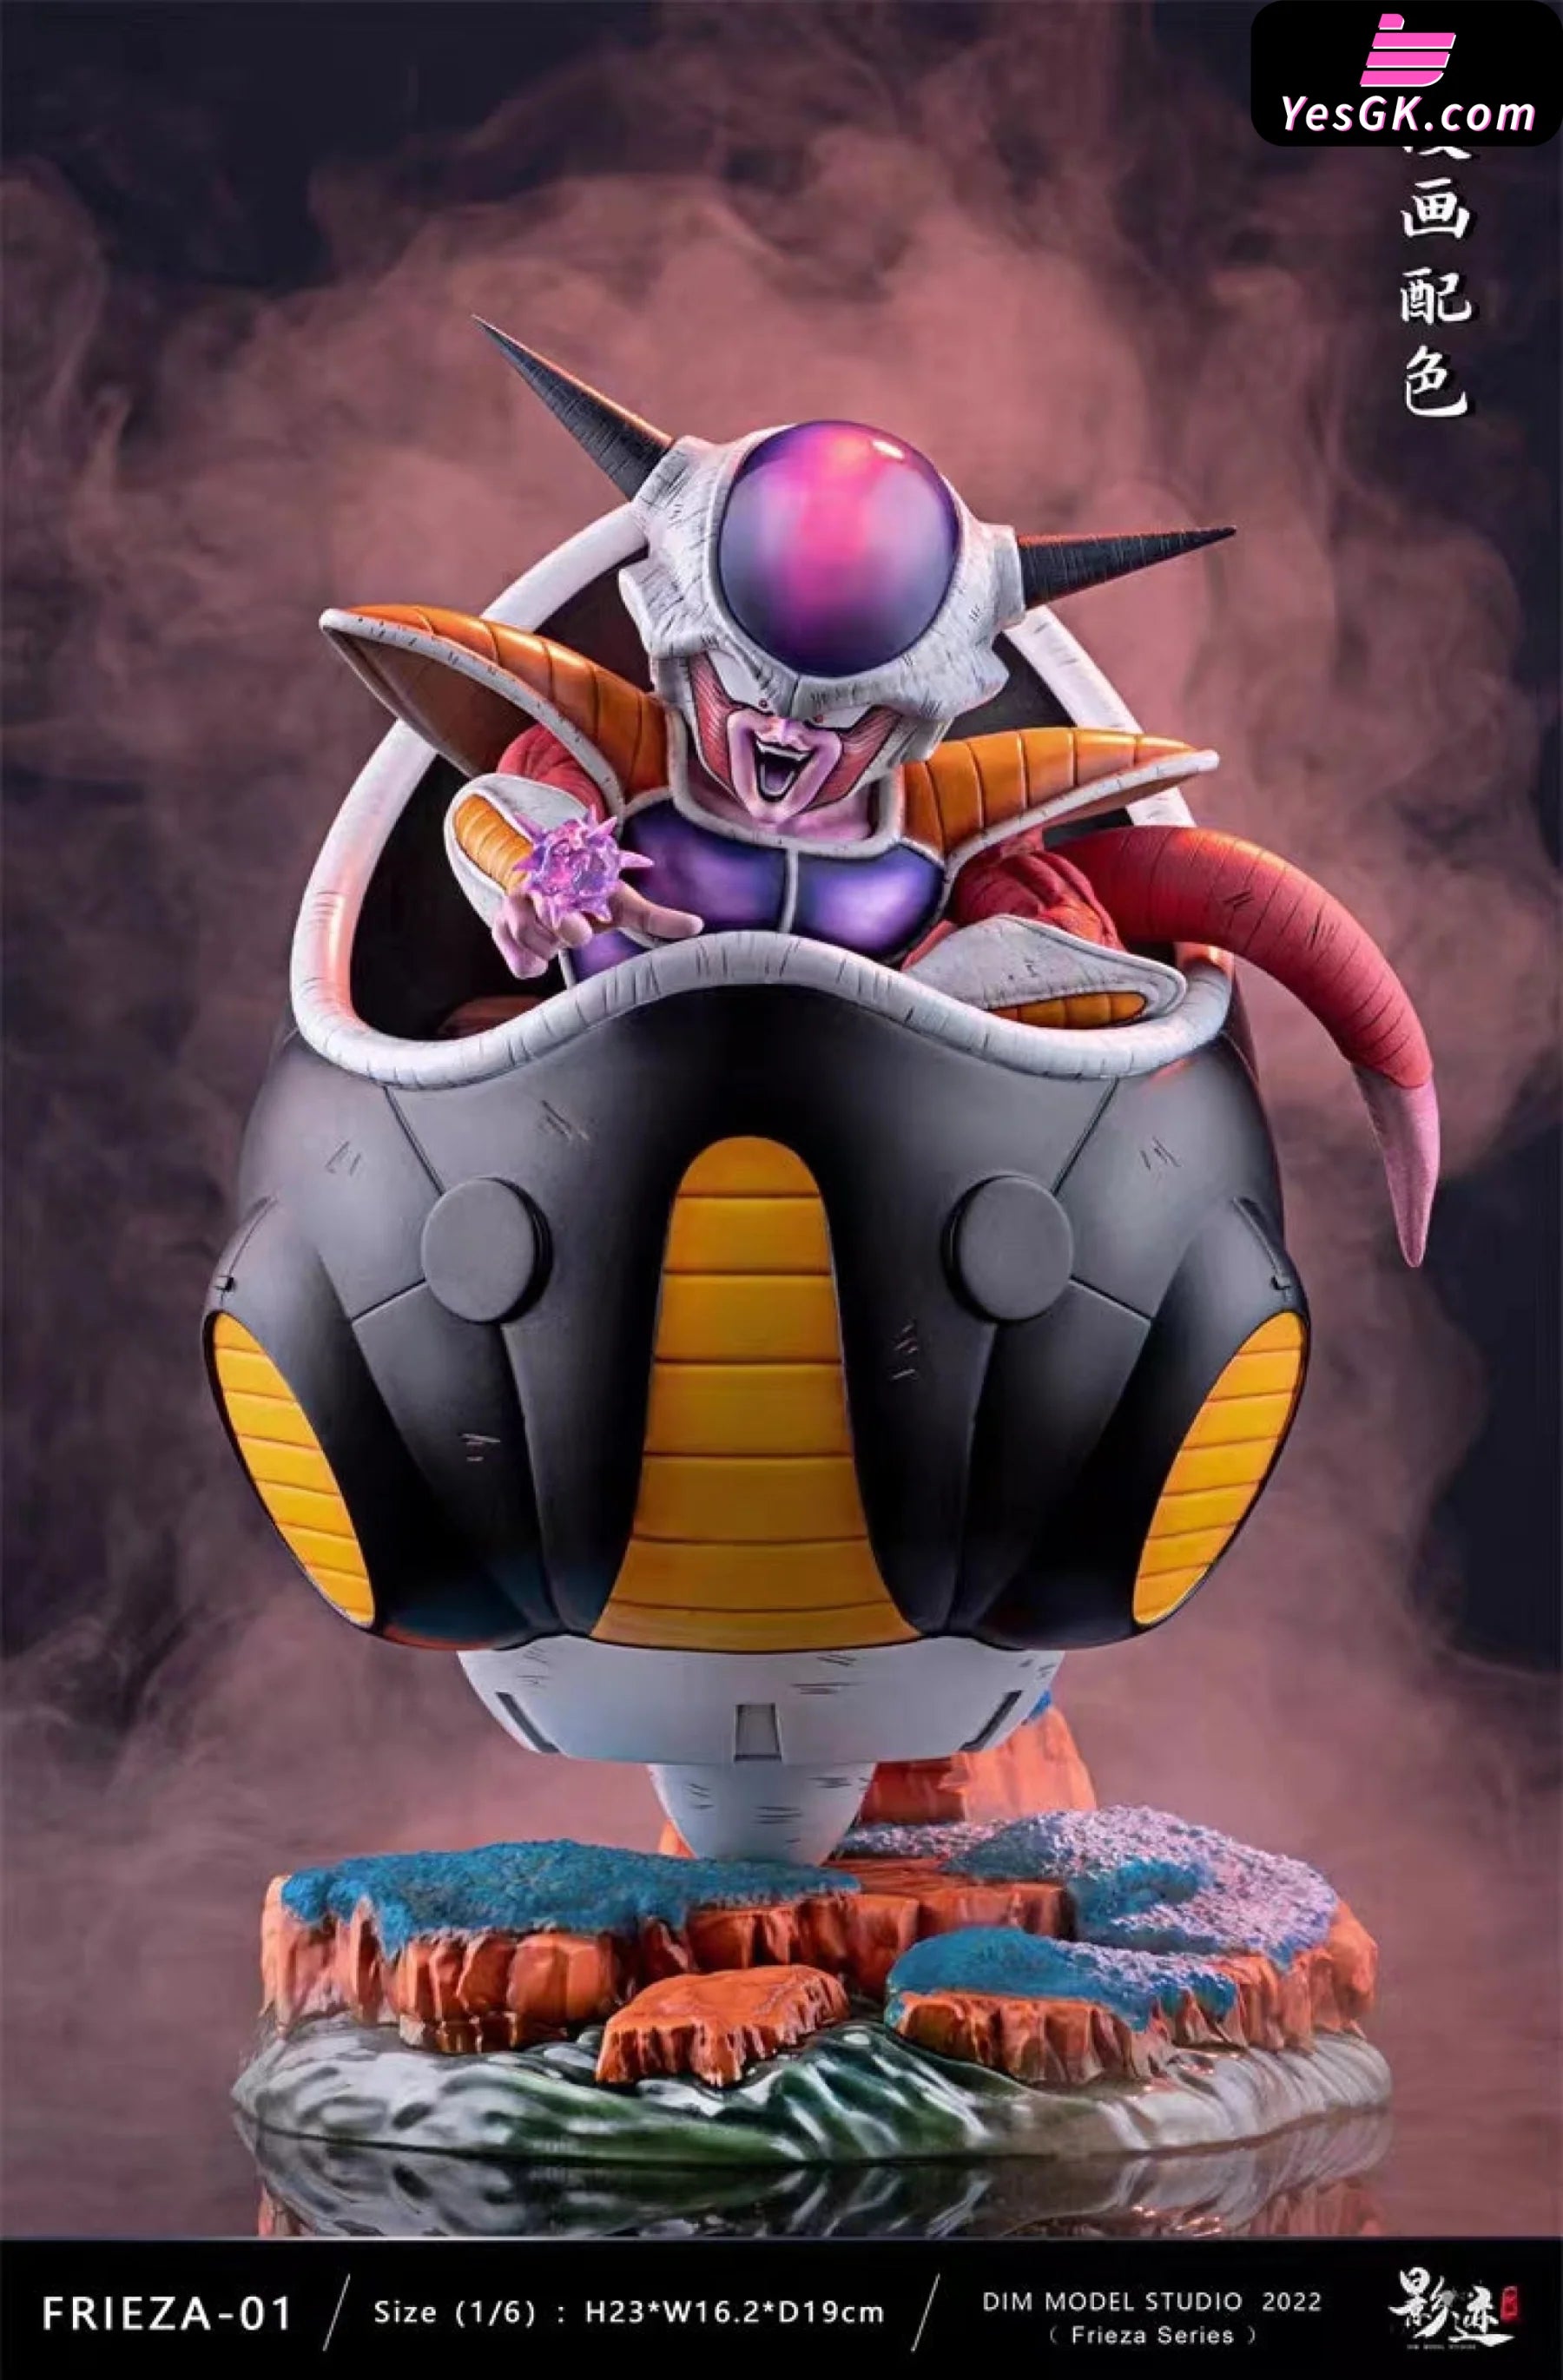 Dragon Ball Frieza Form Series-First Statue - Dim Model Studio [In-Stock] Full Payment / Manga Color